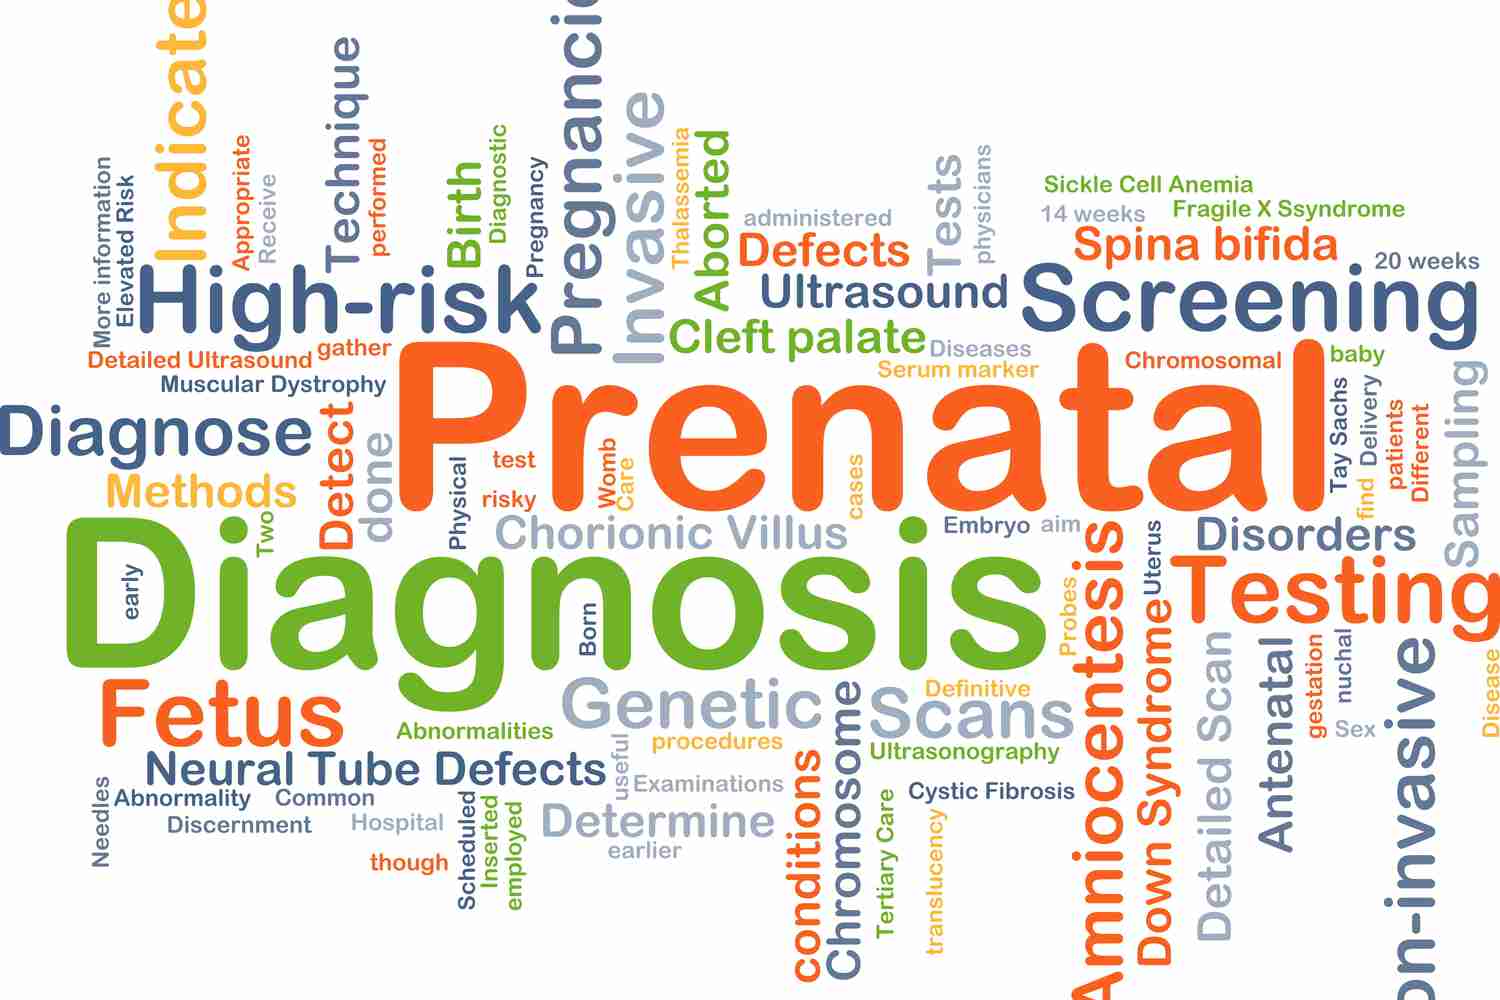 Prenatal Tests during first trimester